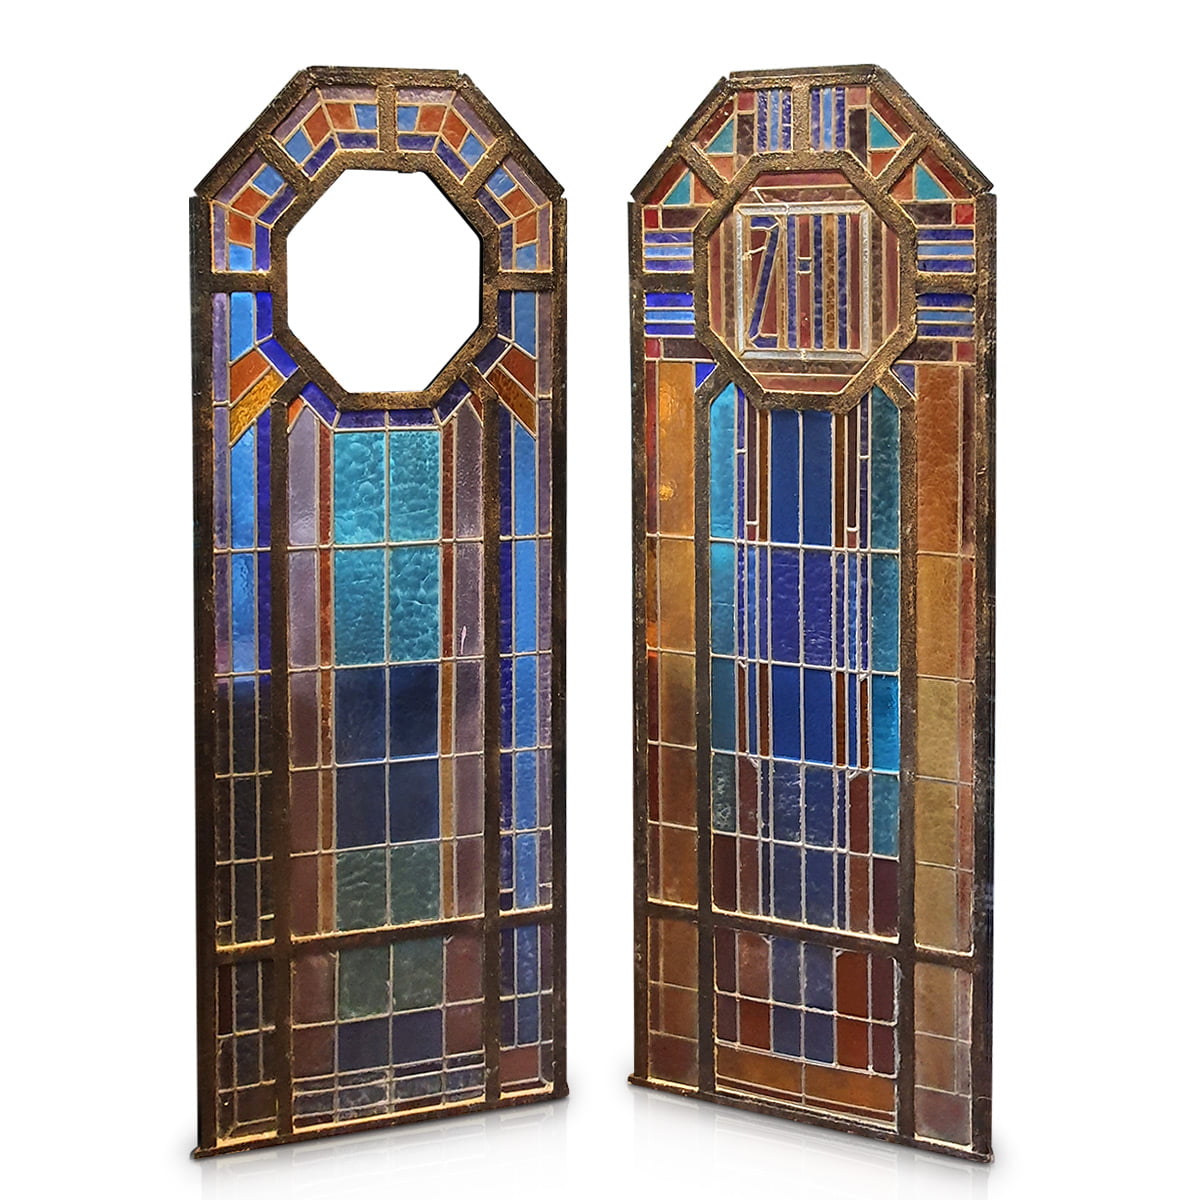 Art deco stained glass doors